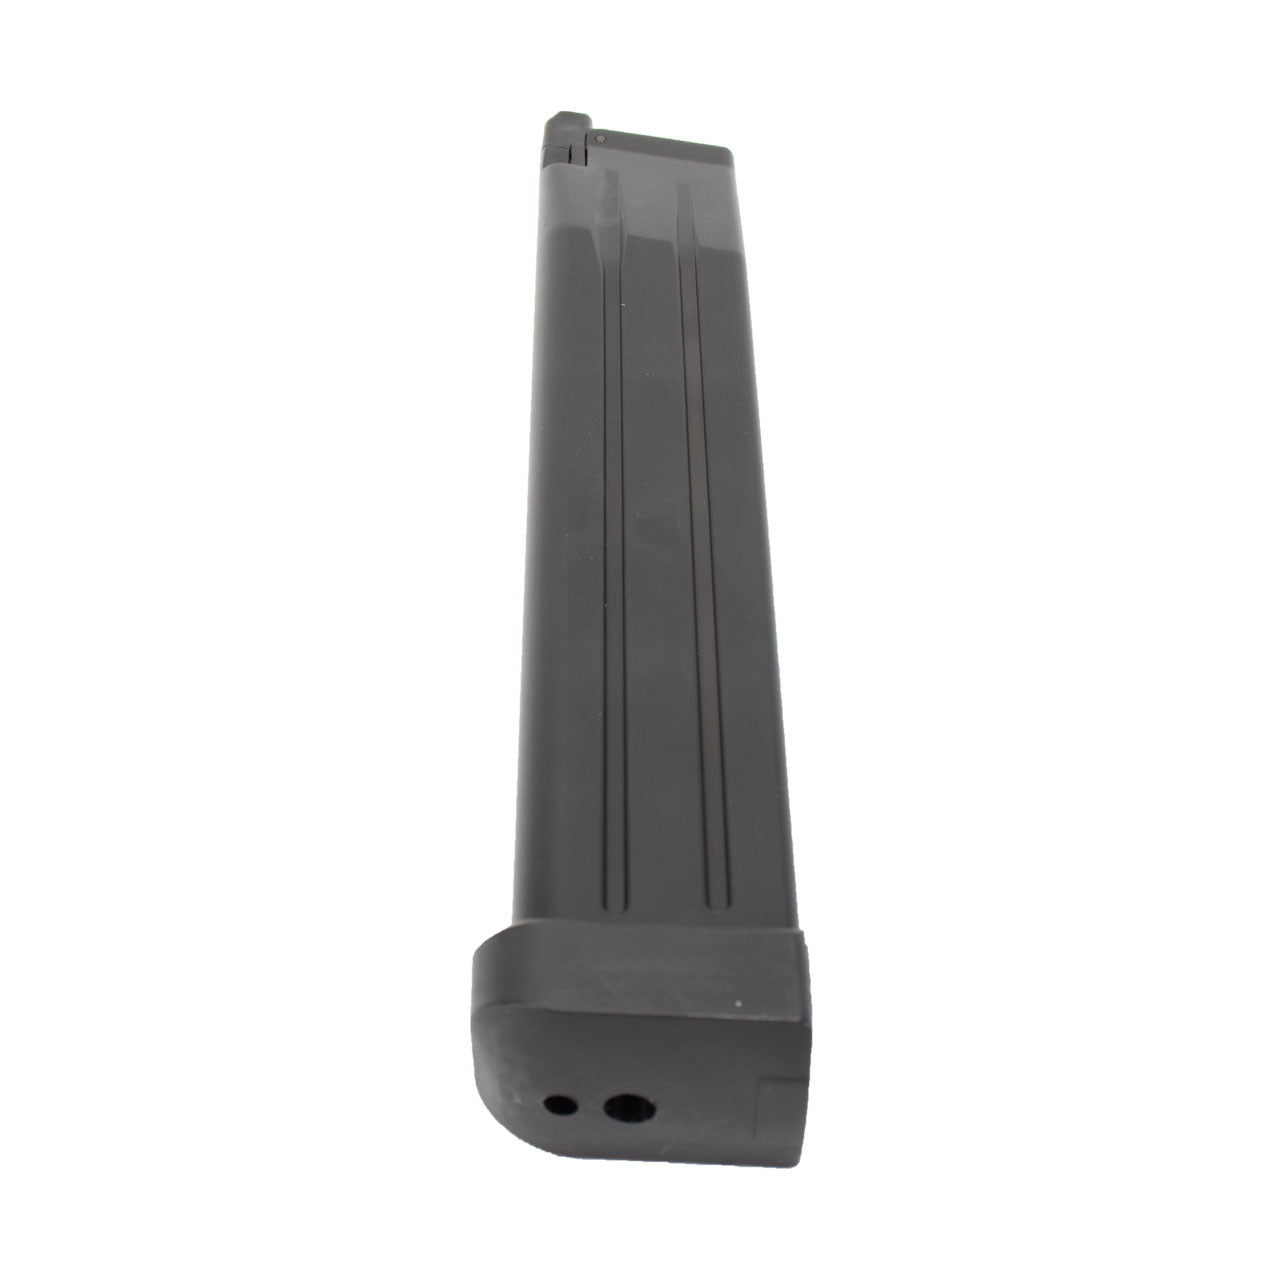 WE 52rd Extended Magazine for WE Hi-Capa Airsoft GBB Gas Blowback Pistols